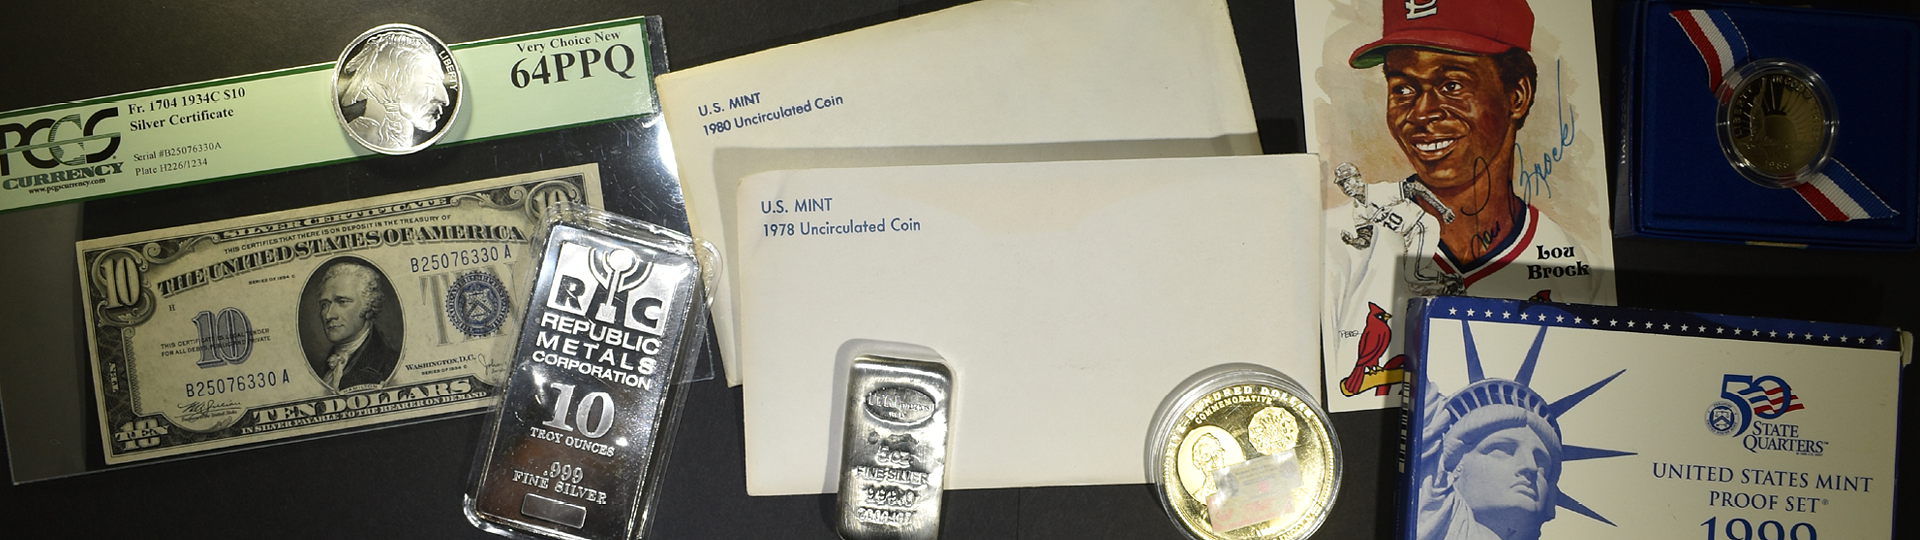 August 18th Silver City Rare Coin & Currency Auction by Silver City Auctions